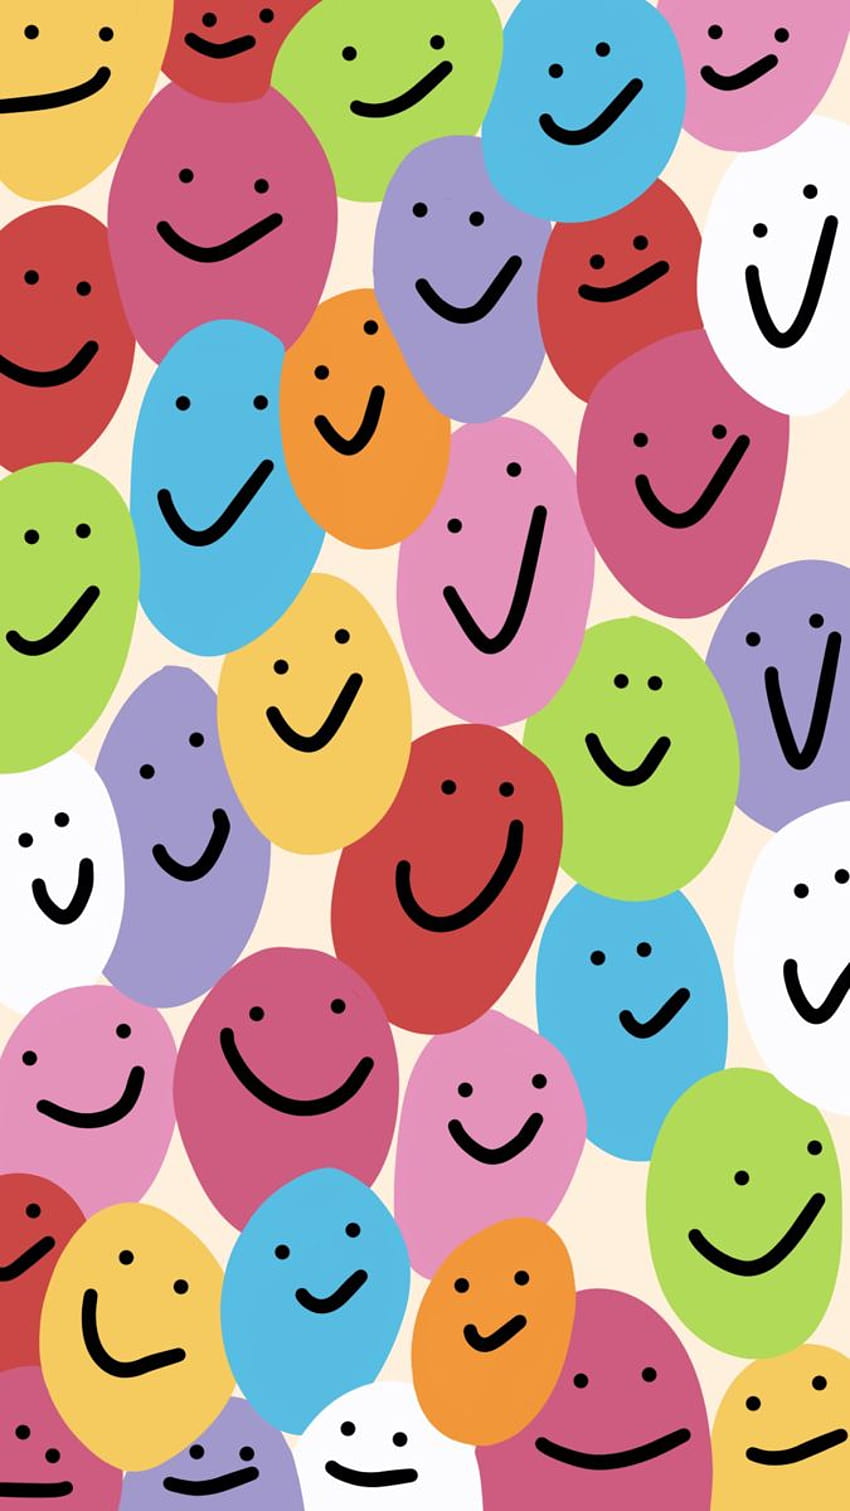 Colorful Smile IPhone Wallpaper  IPhone Wallpapers  iPhone Wallpapers